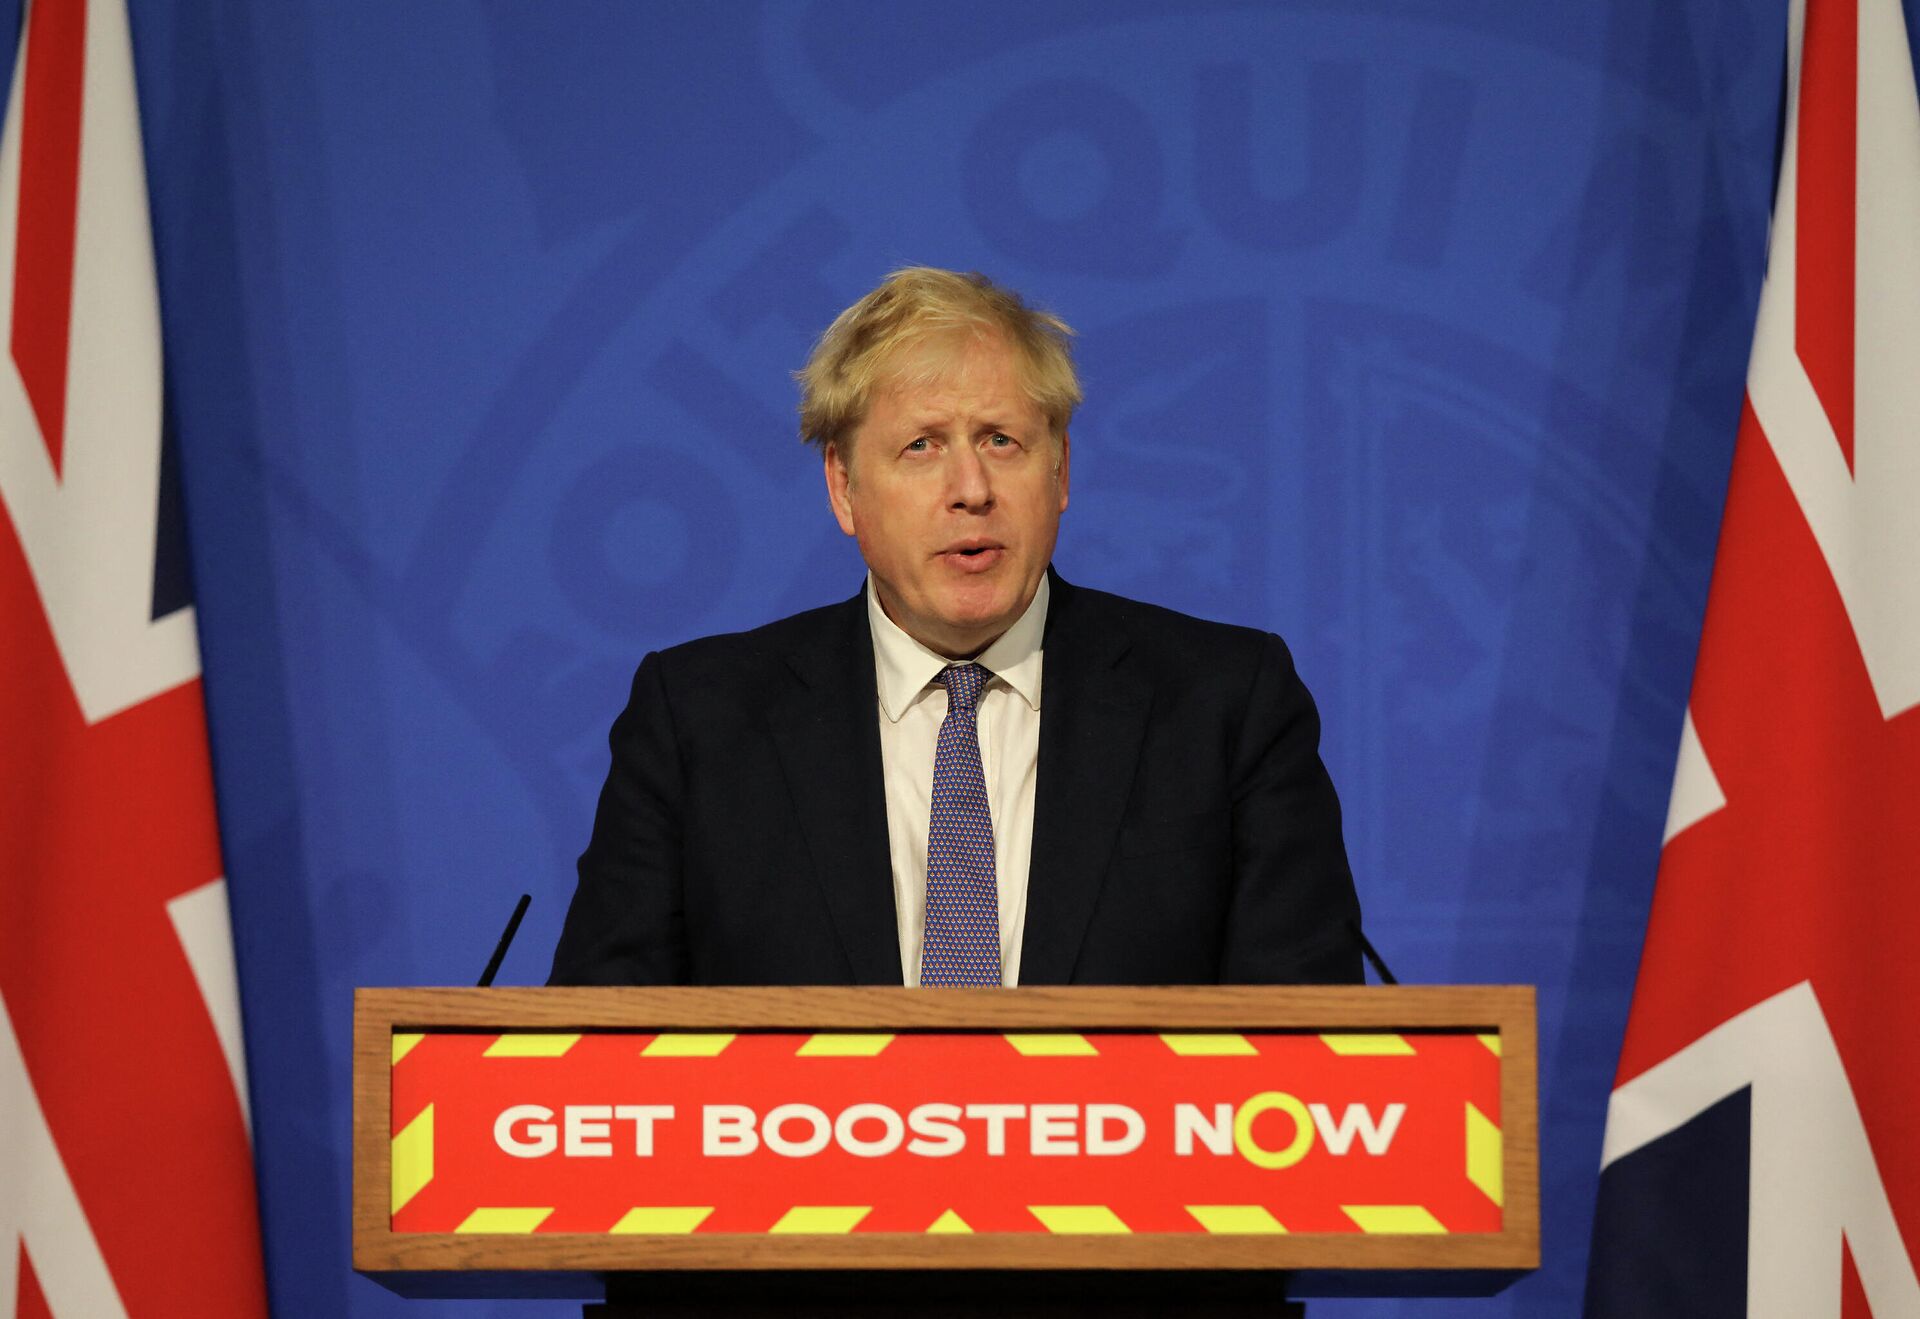 Britain's Prime Minister Boris Johnson speaks during a virtual press conference to update the nation on the status of the Covid-19 pandemic, in the Downing Street briefing room in central London on January 4, 2022. - Sputnik International, 1920, 14.01.2022